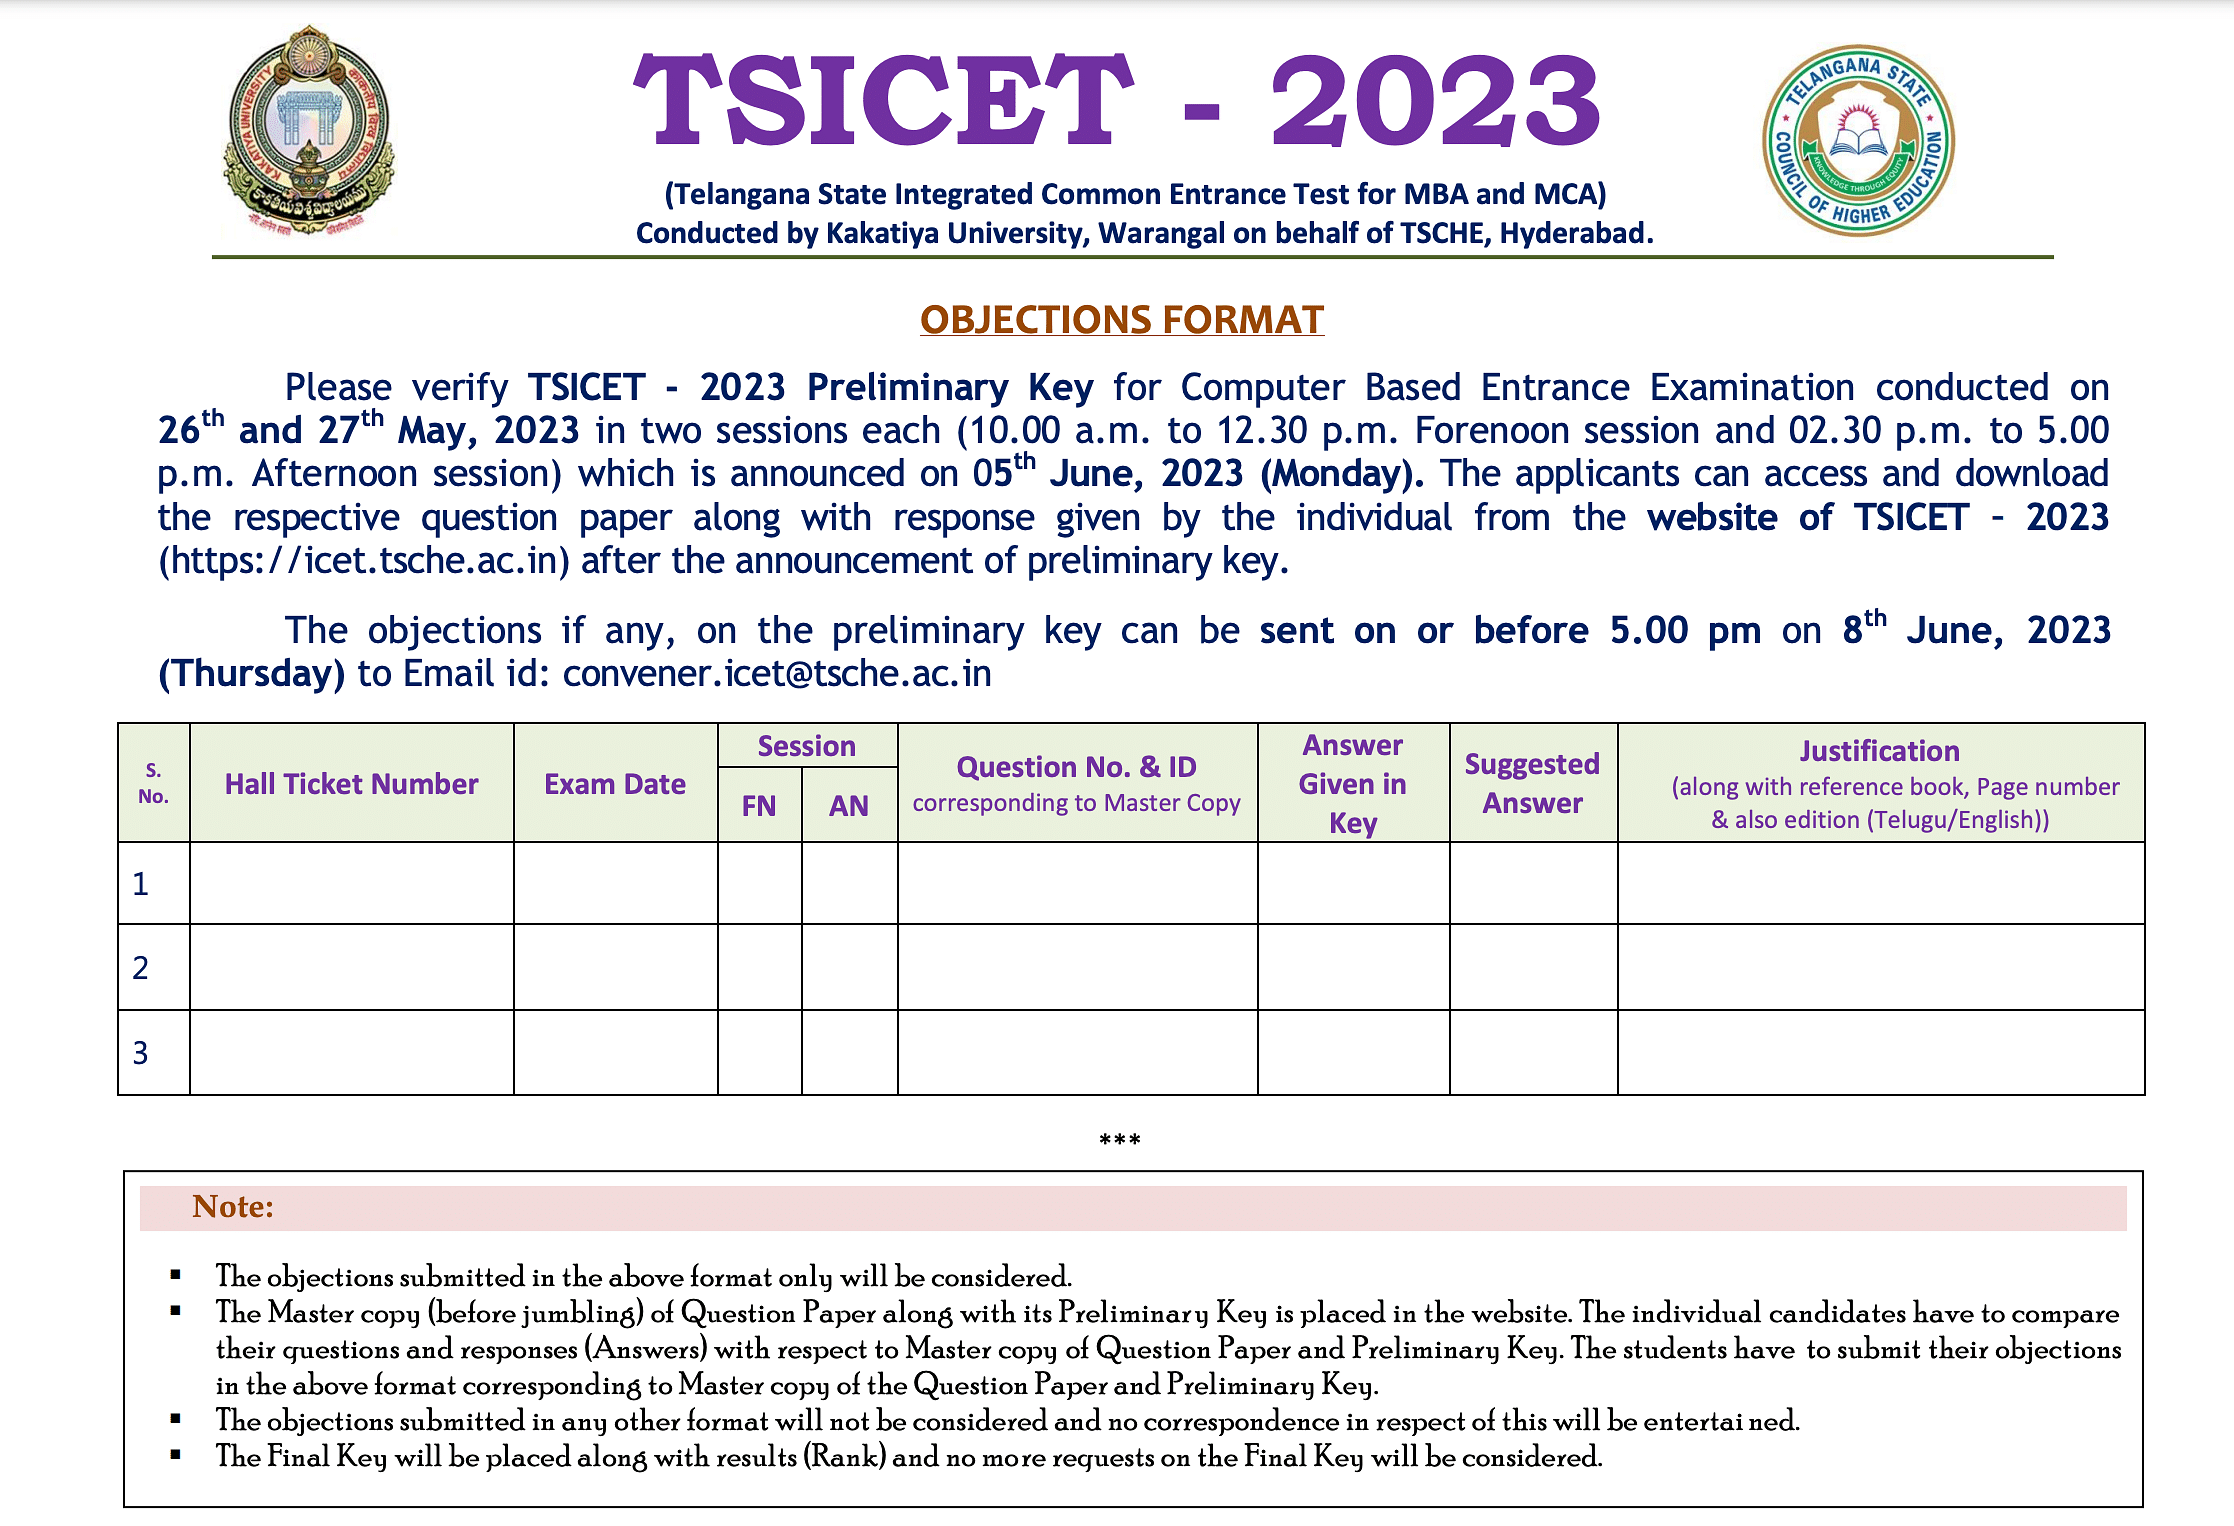 TS ICET Objection Form 2023